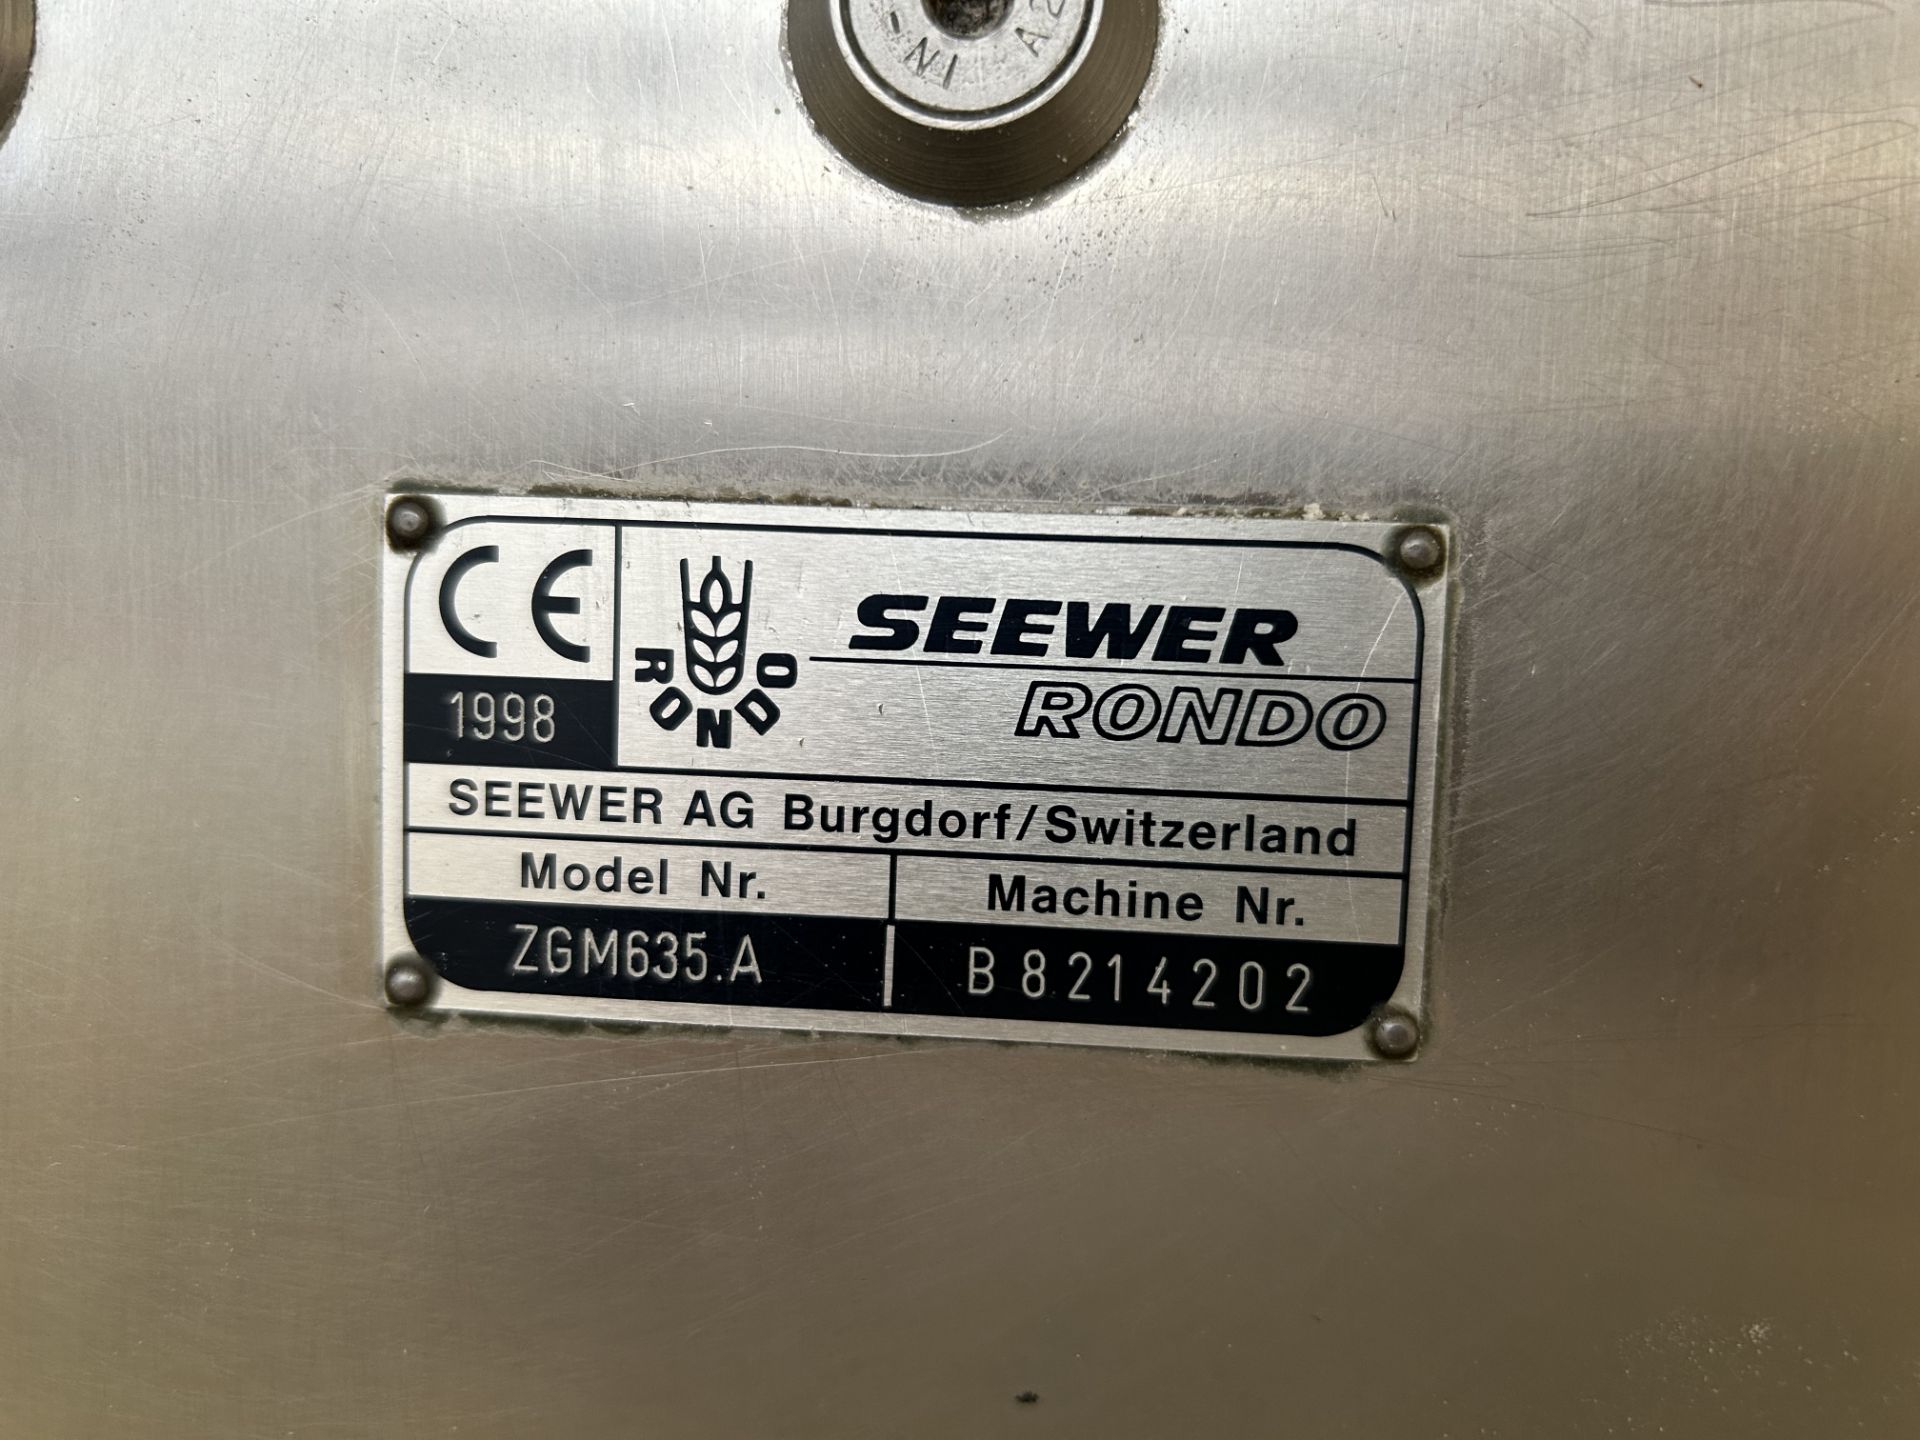 Sewer Rondo 2GM635.A Dough Roller/Sheeter Machine | YOM: 1998 | LOCATED IN WHITEFIELD - Image 7 of 8